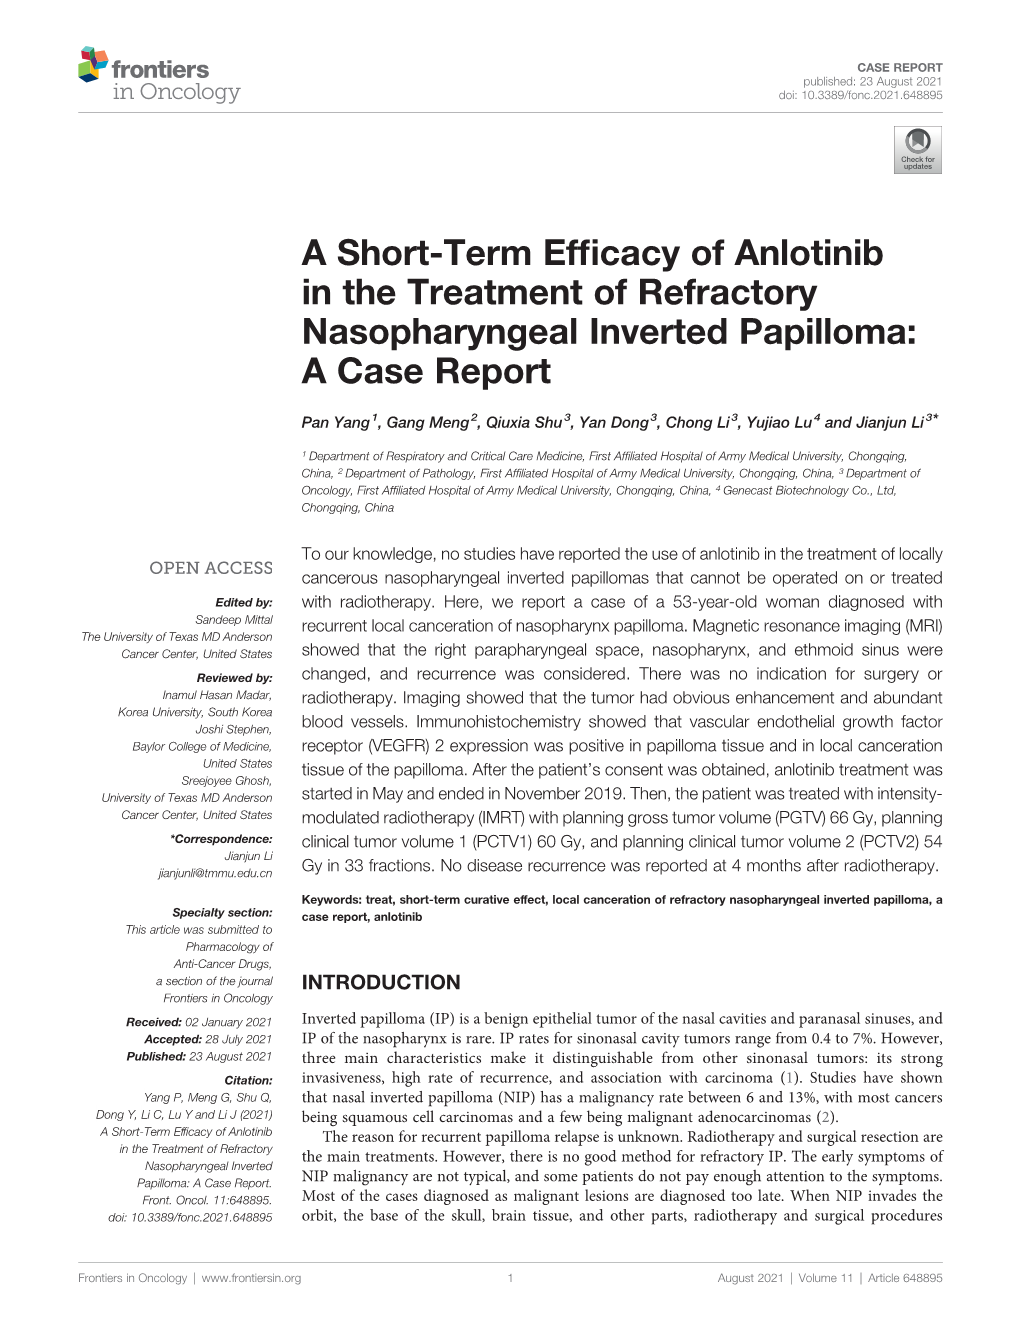 A Short-Term Efficacy of Anlotinib in the Treatment Of